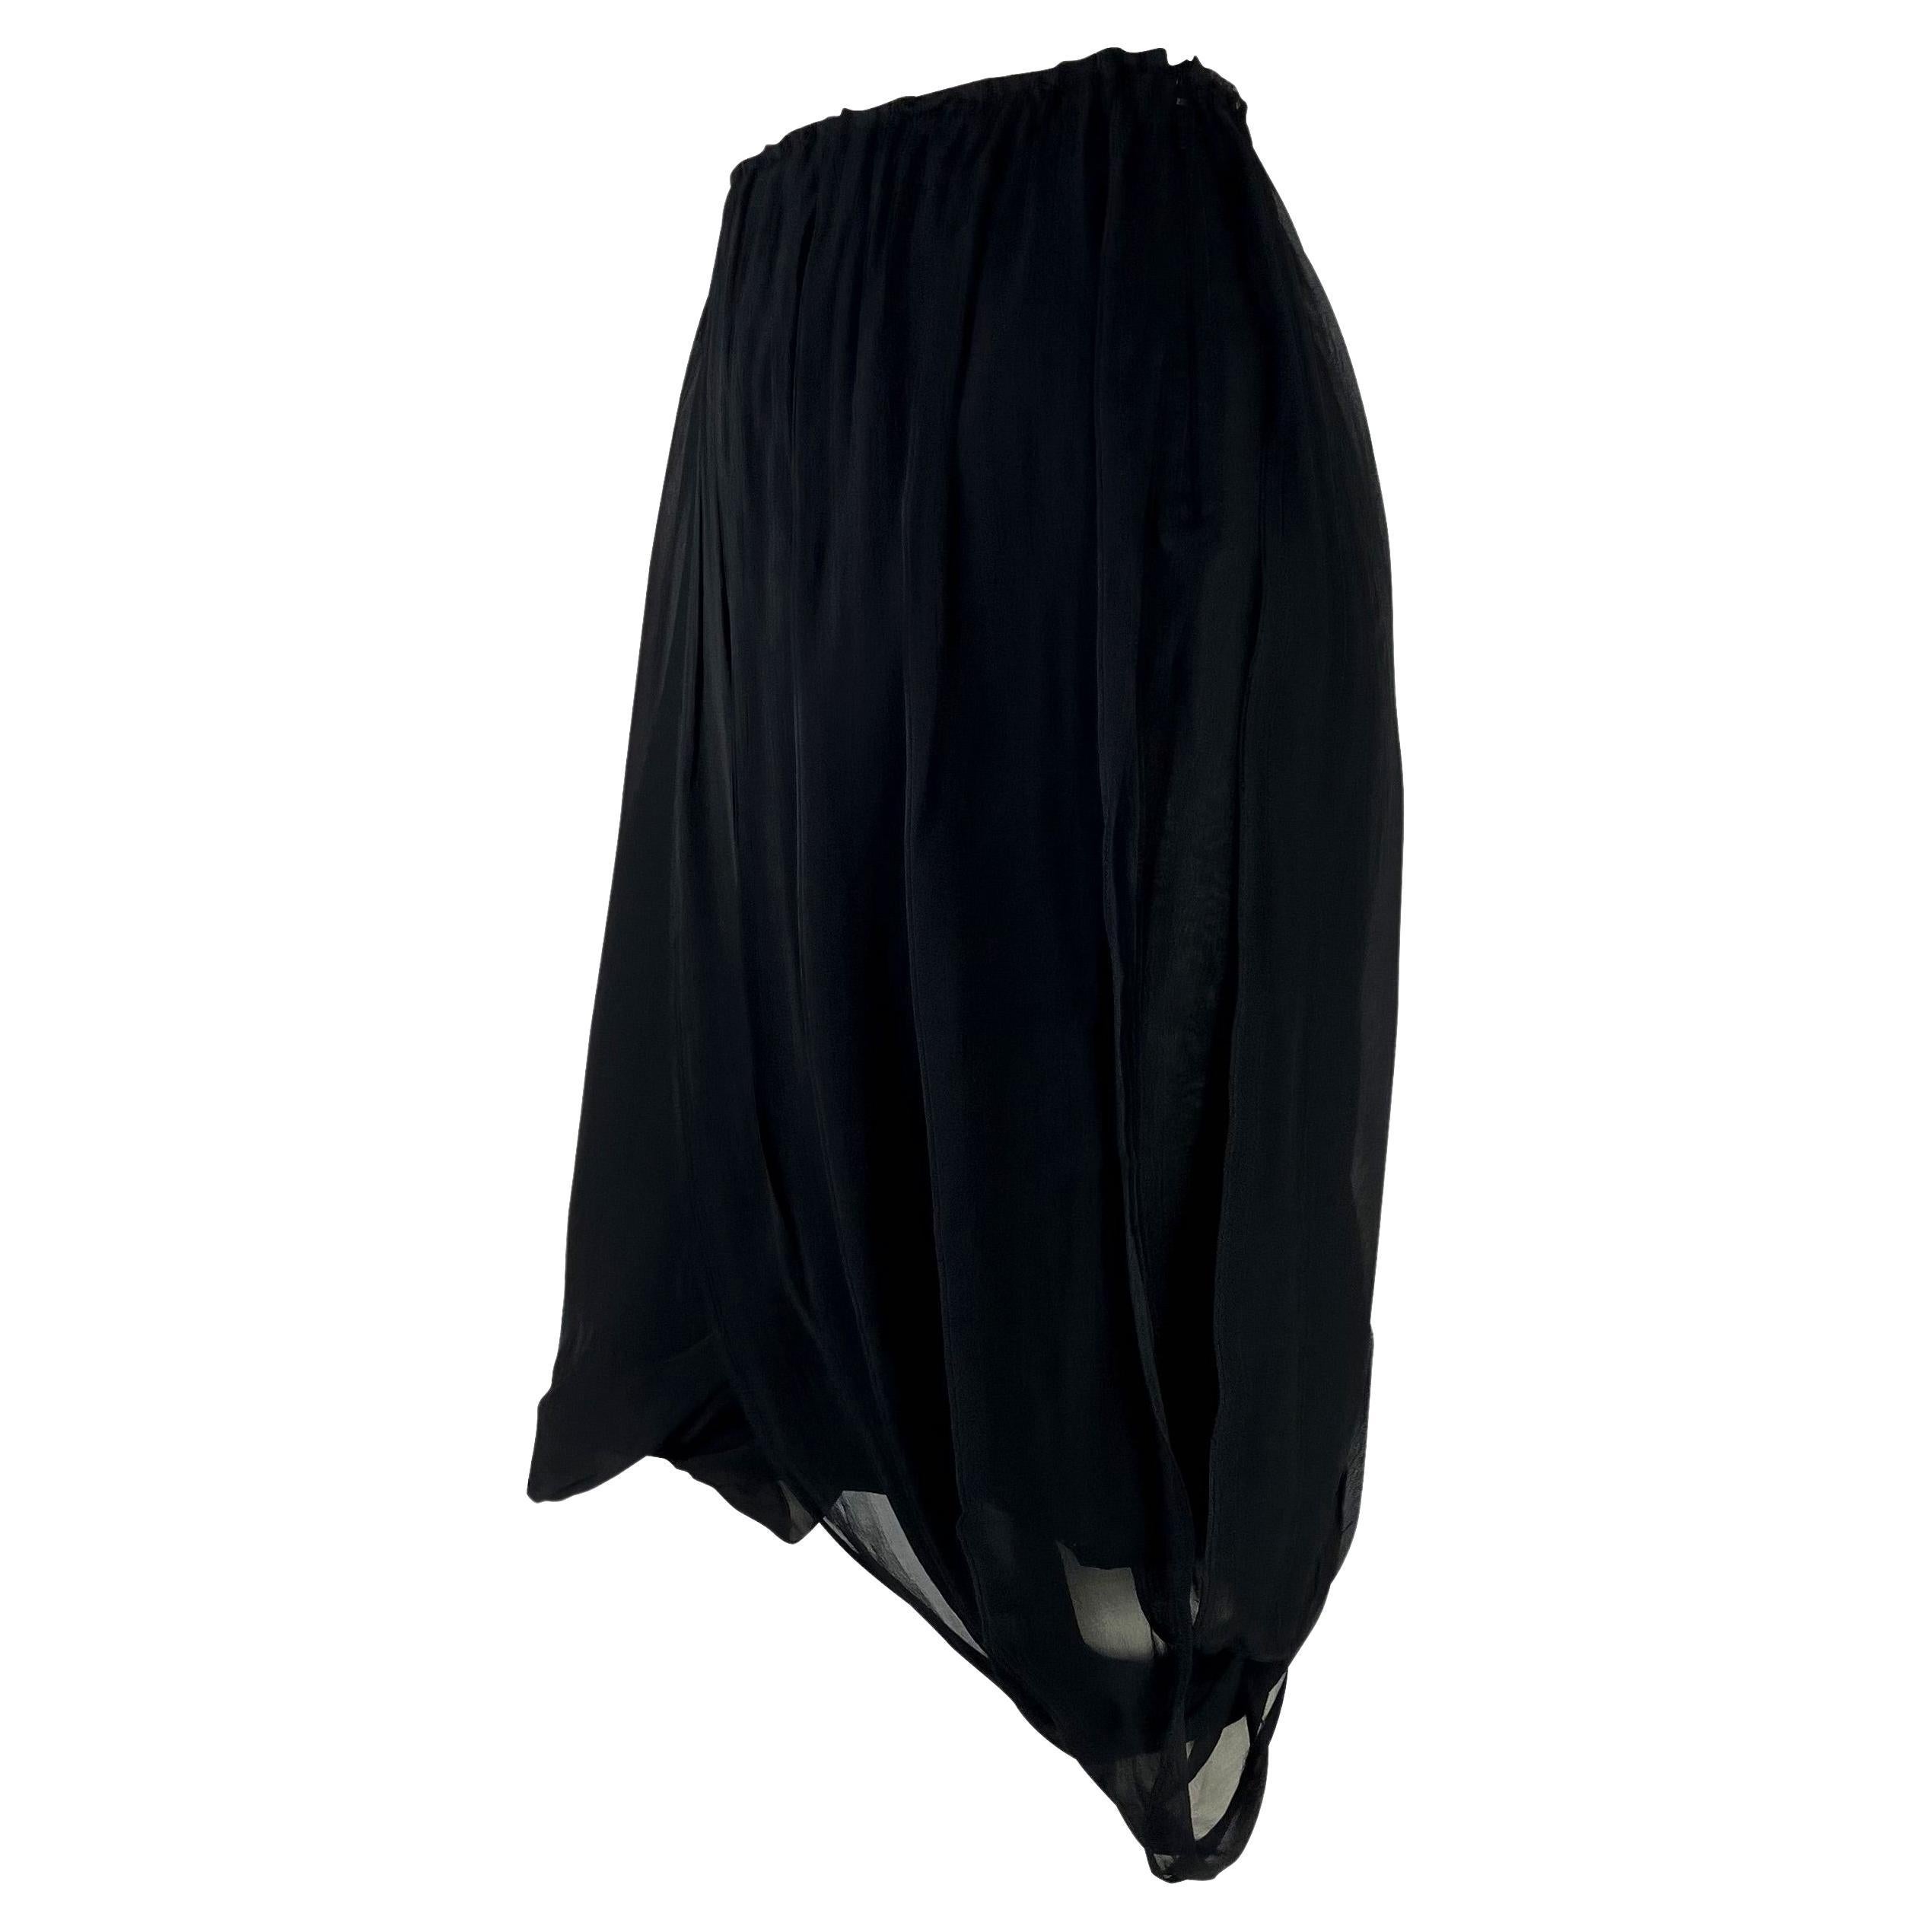 Presenting a beautiful black chiffon Gucci skirt, designed by Tom Ford. From 2002, this skirt is draped in light layers of chiffon that sway with every movement. 

Approximate measurements:
Size - IT44
33